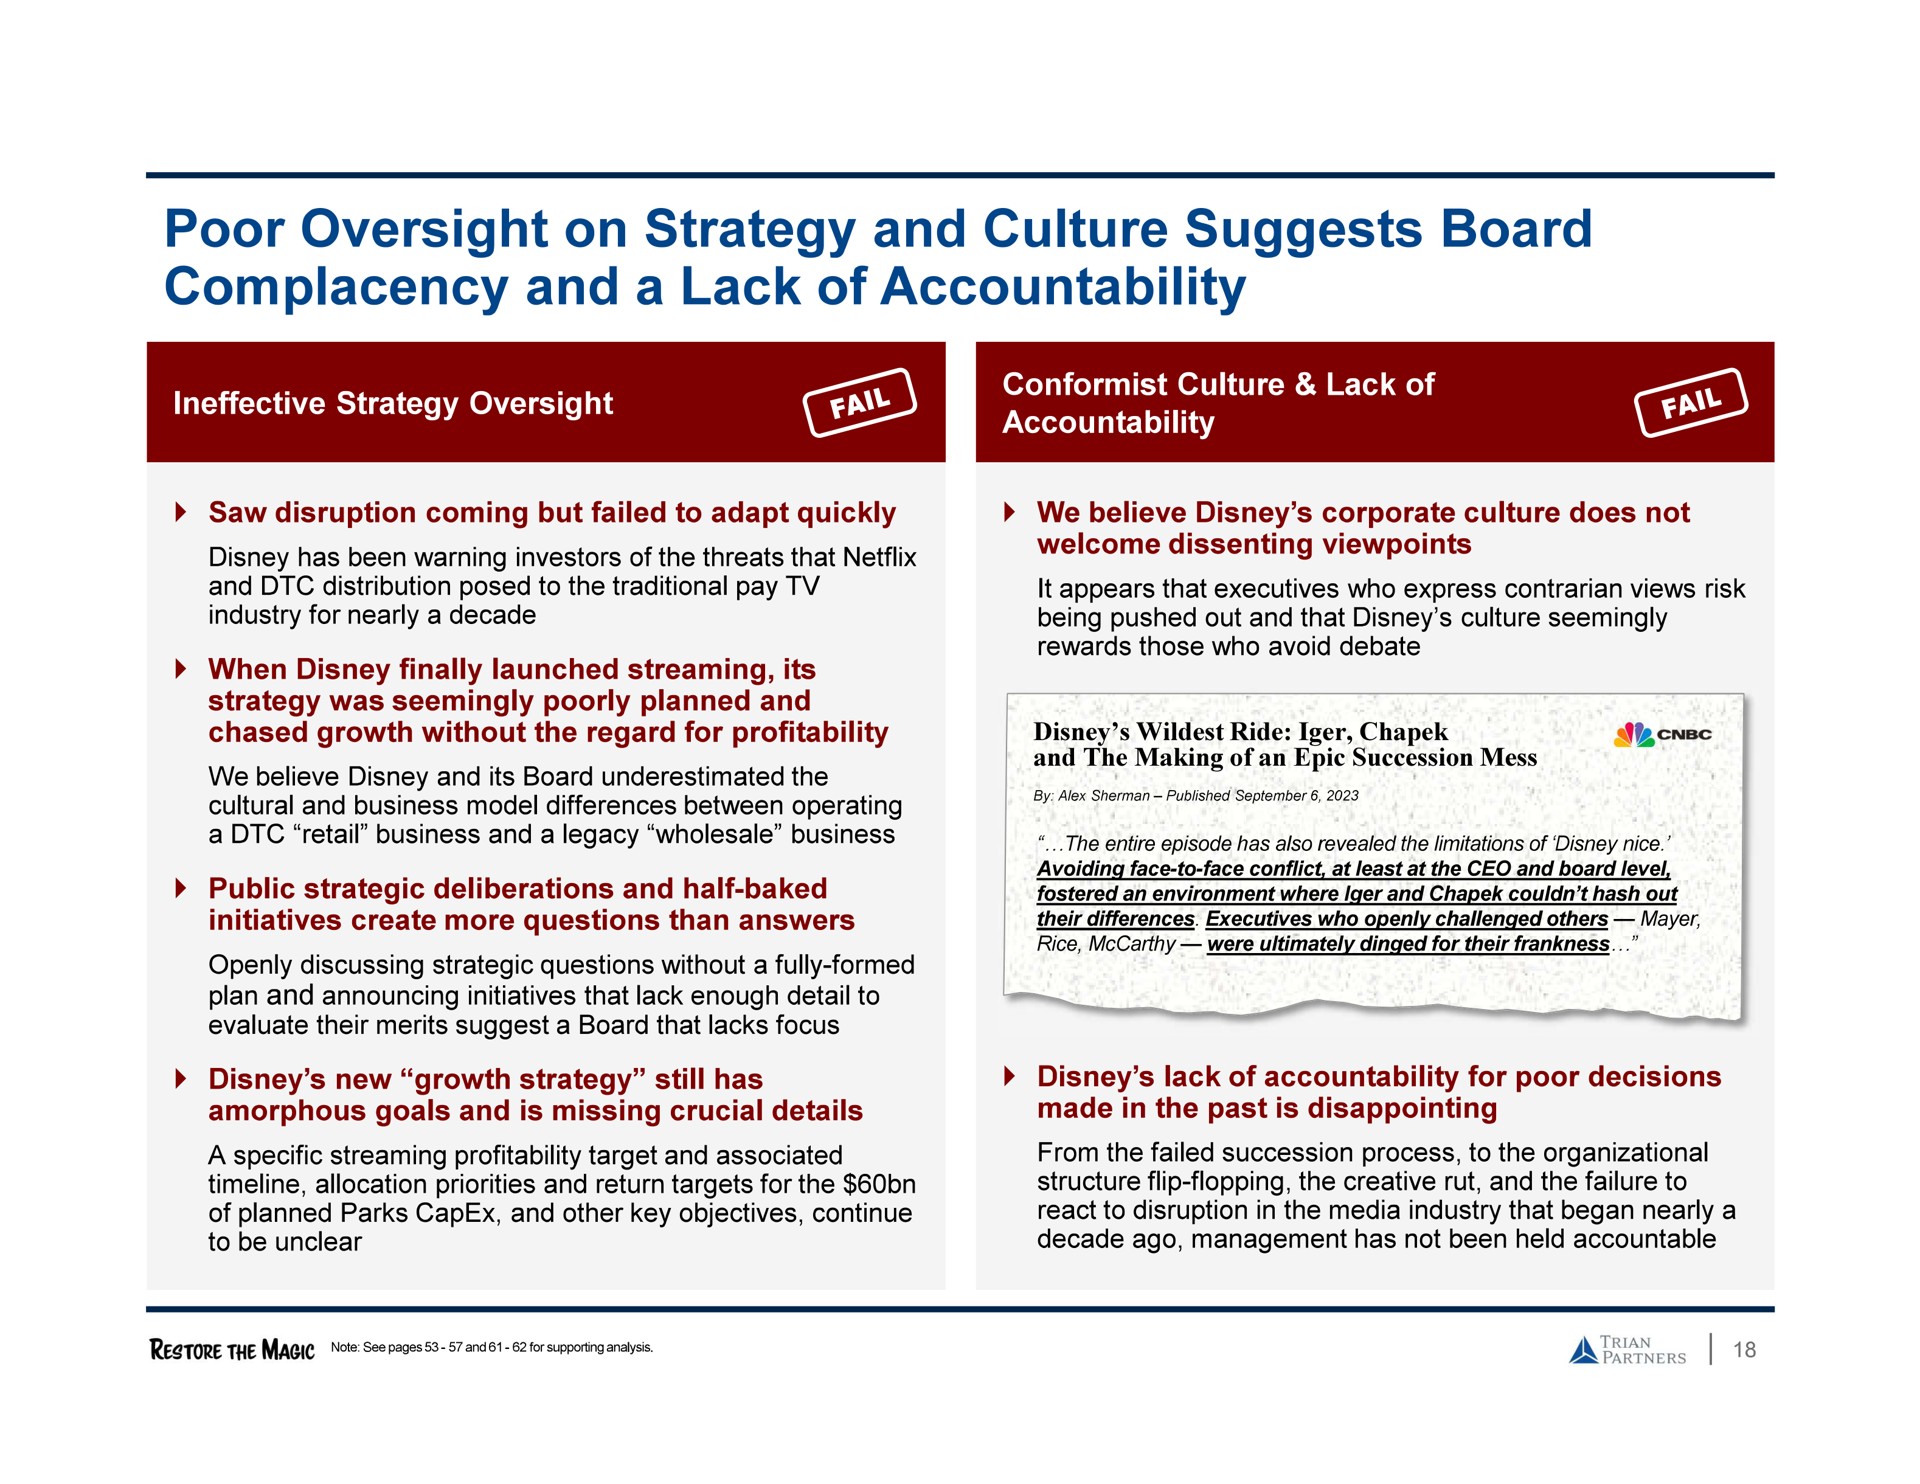 poor oversight on strategy and culture suggests board complacency and a lack of accountability | Trian Partners